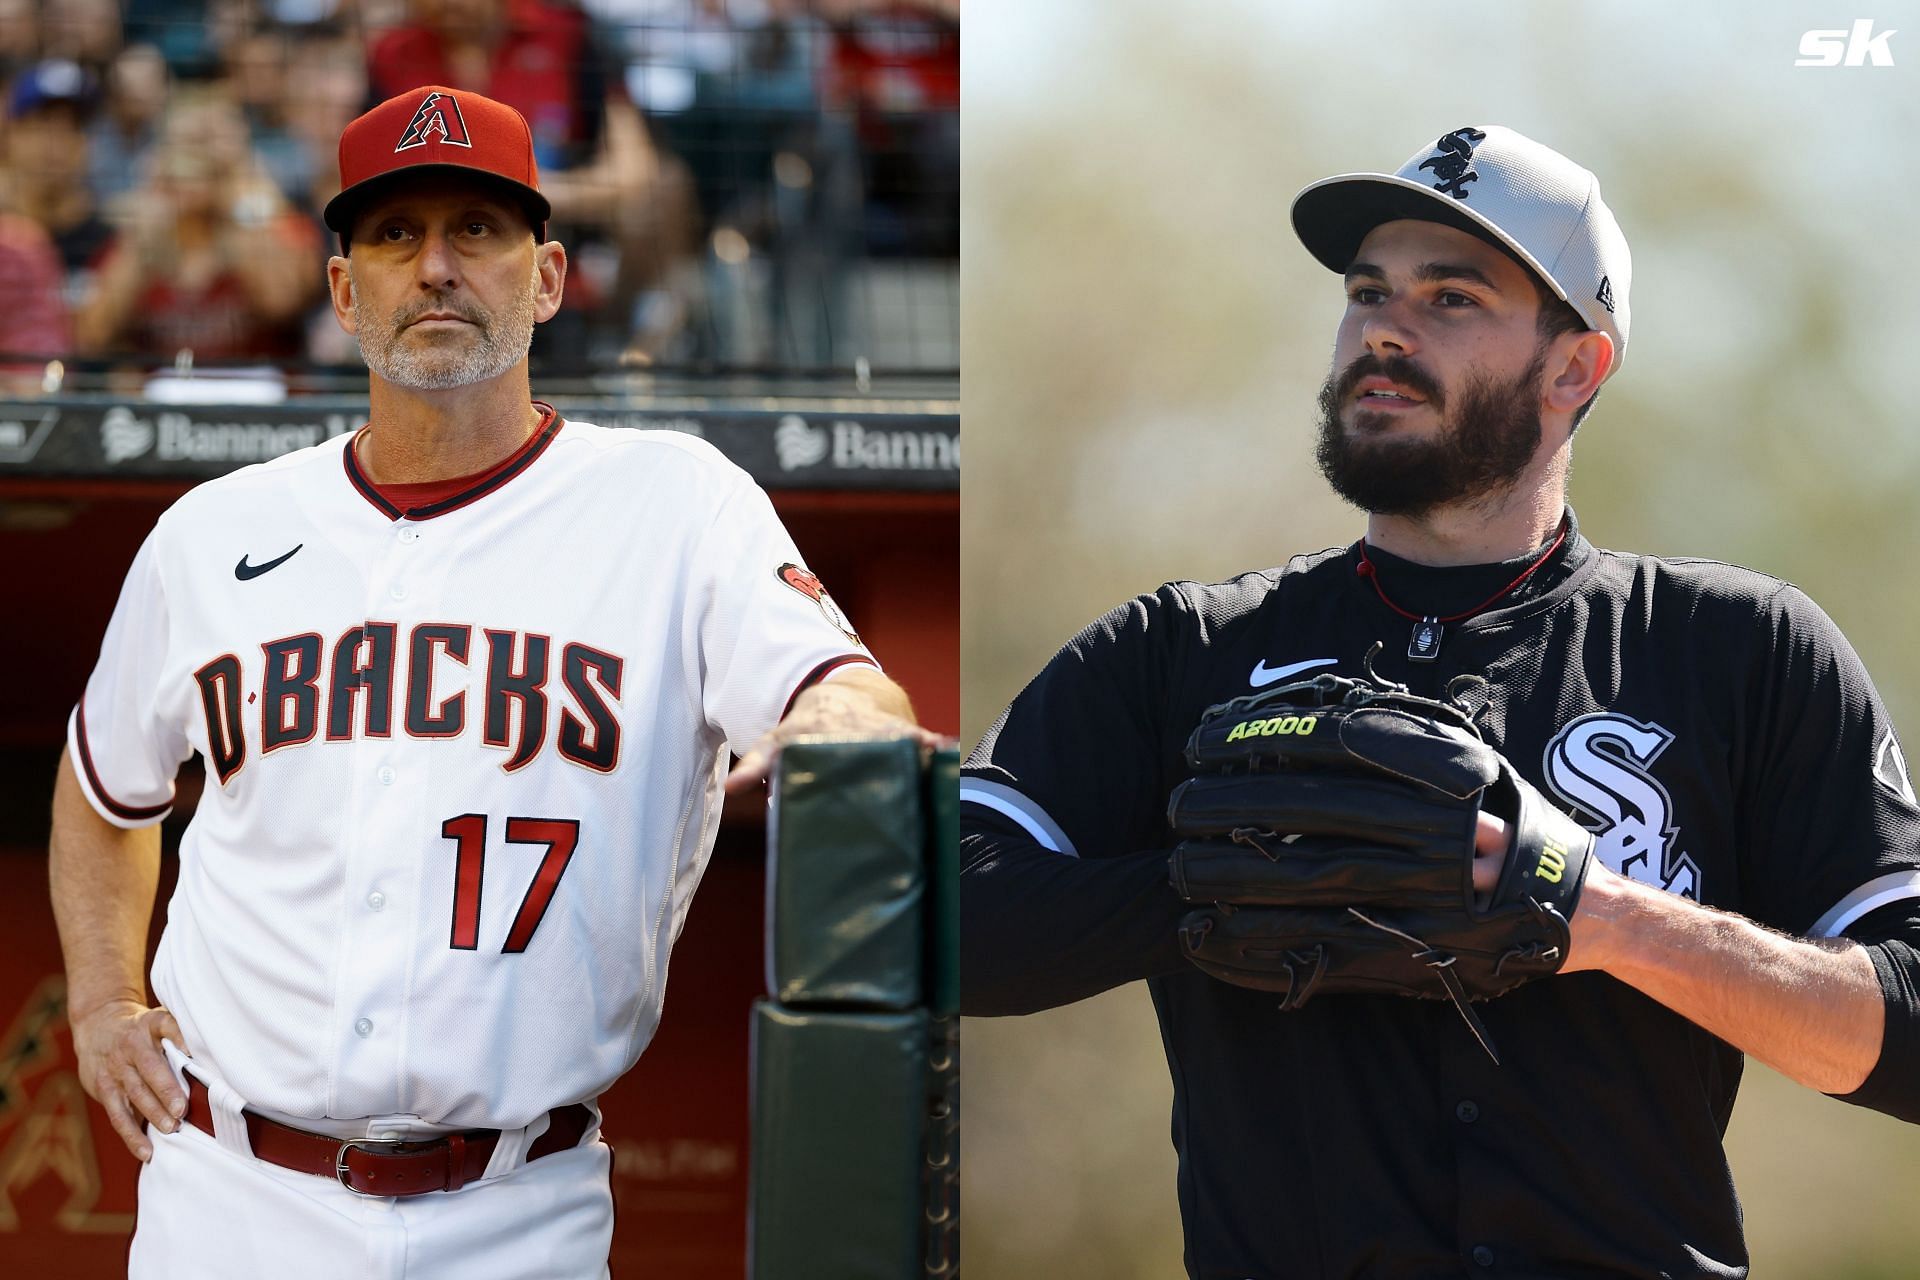 Torey Lovullo not happy with the Dylan Cease trade